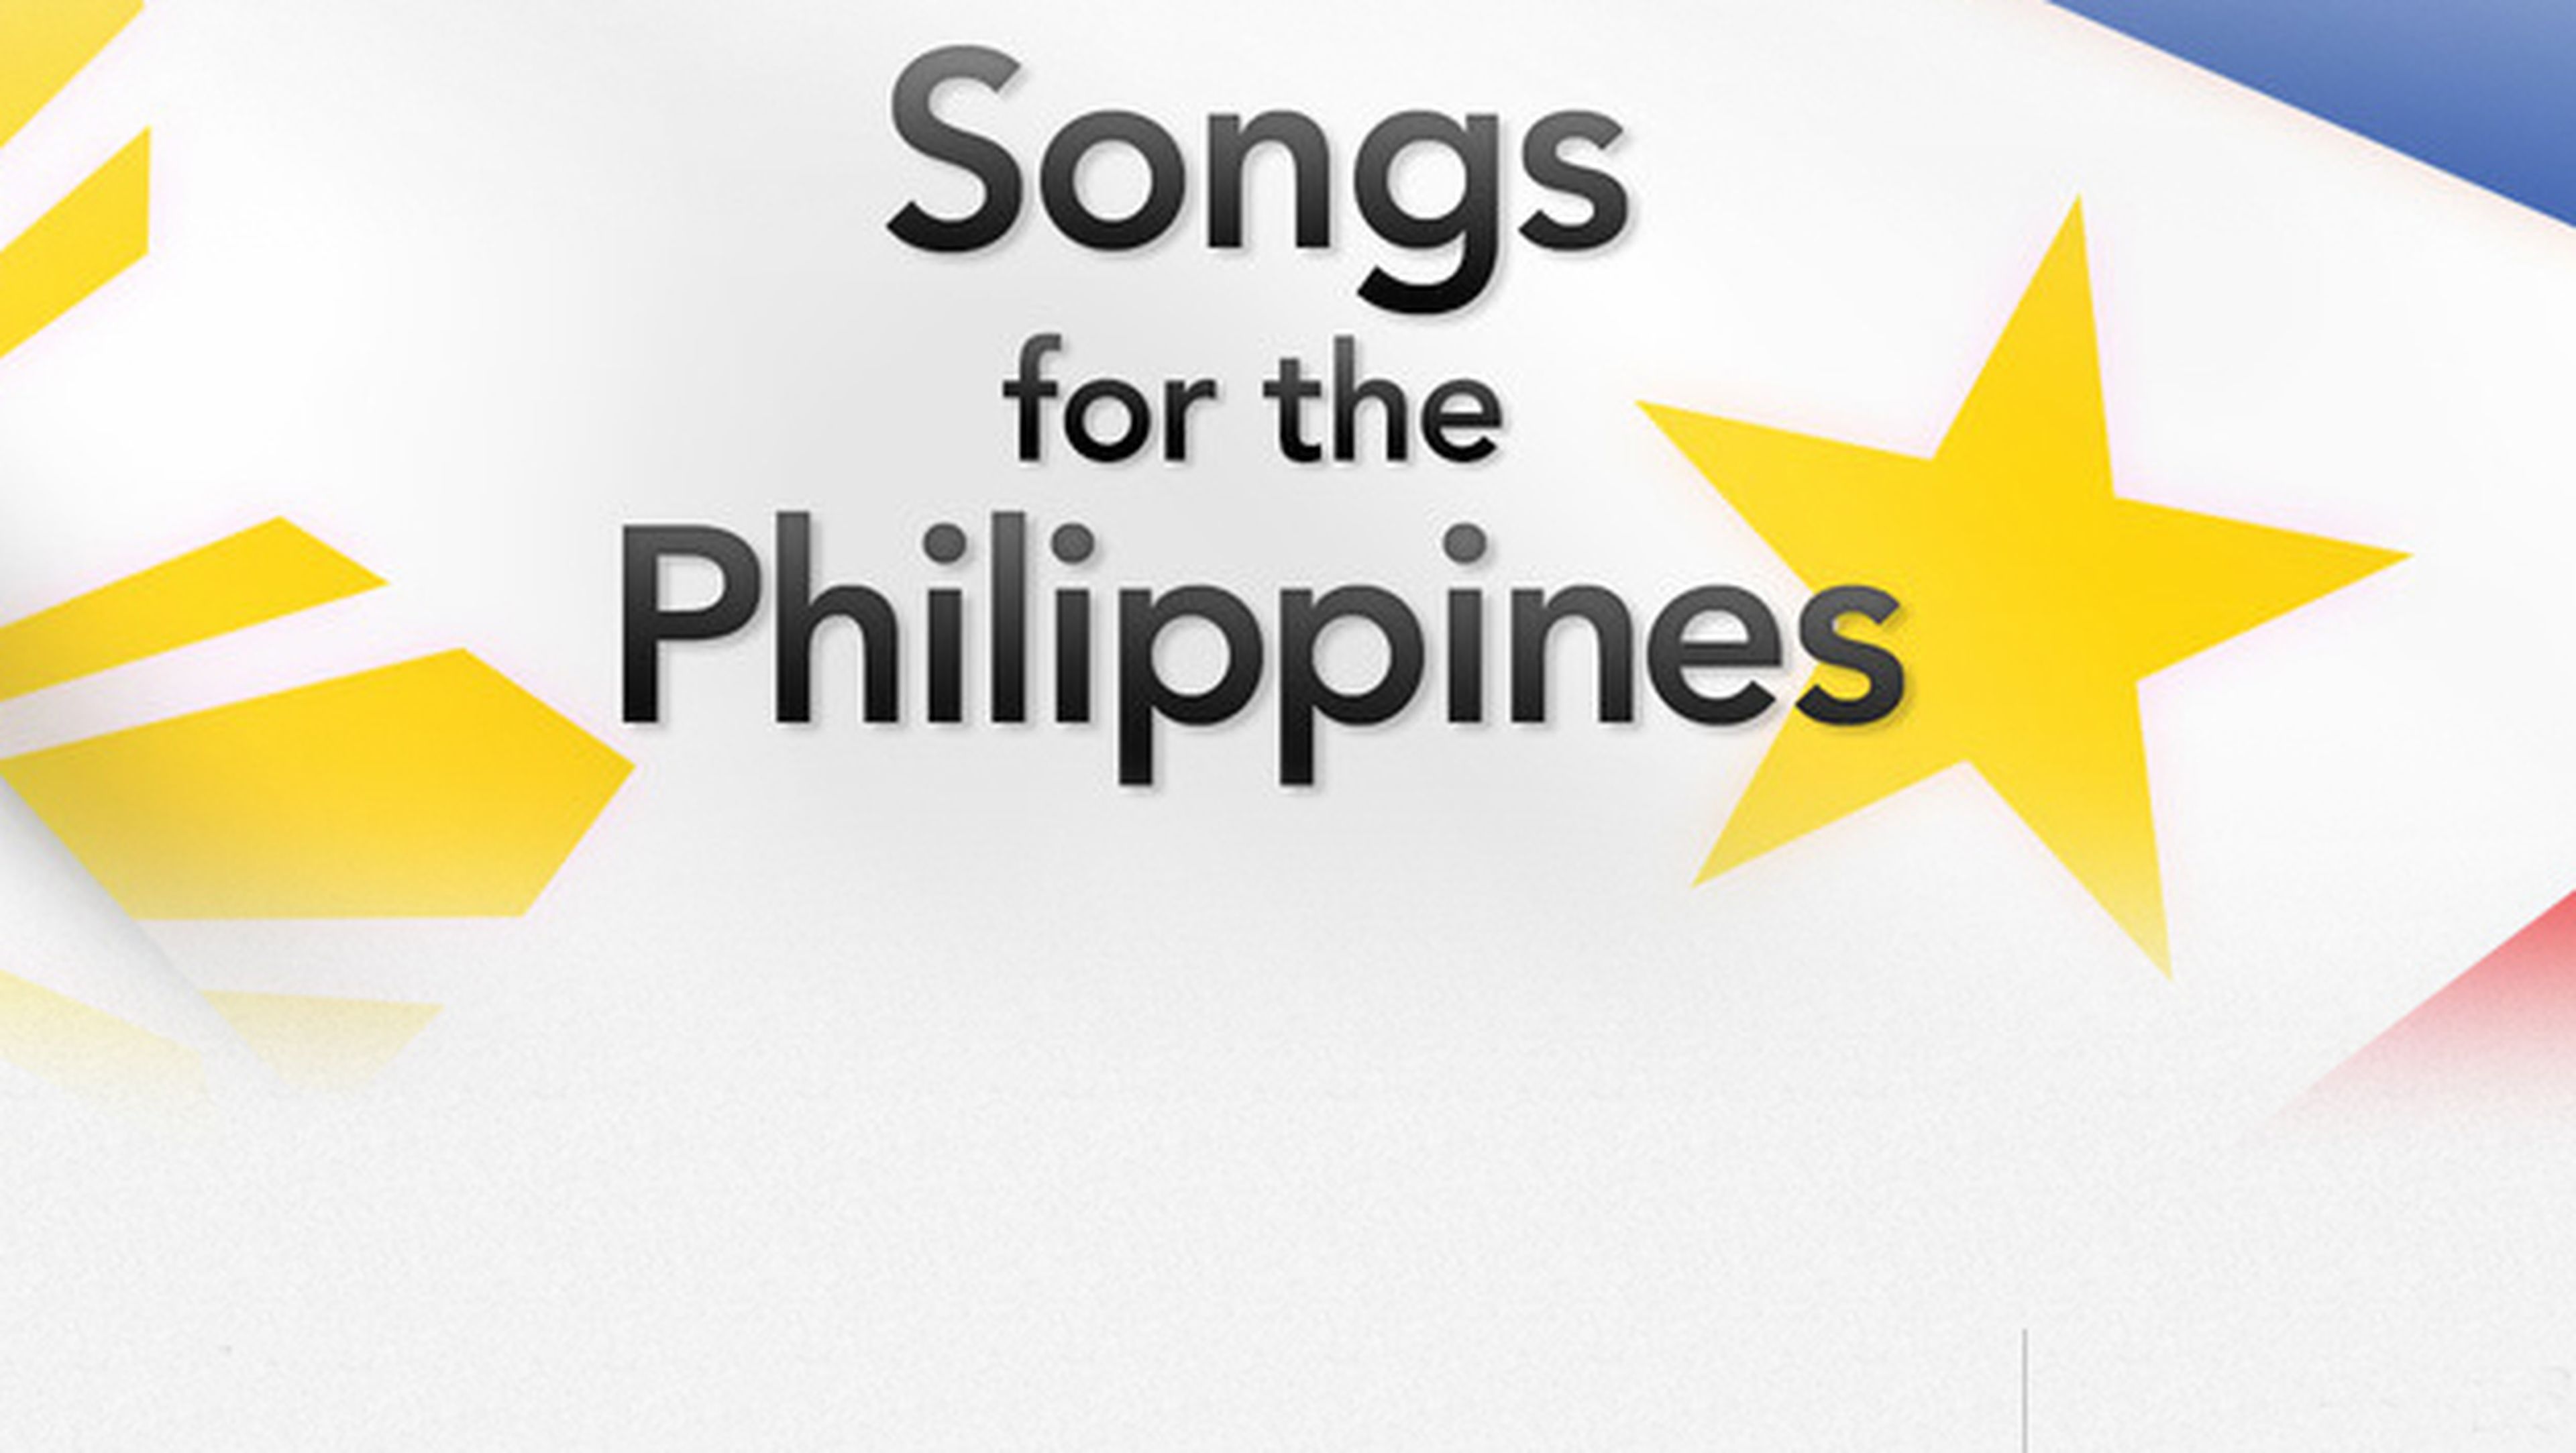 Songs for the Philippines